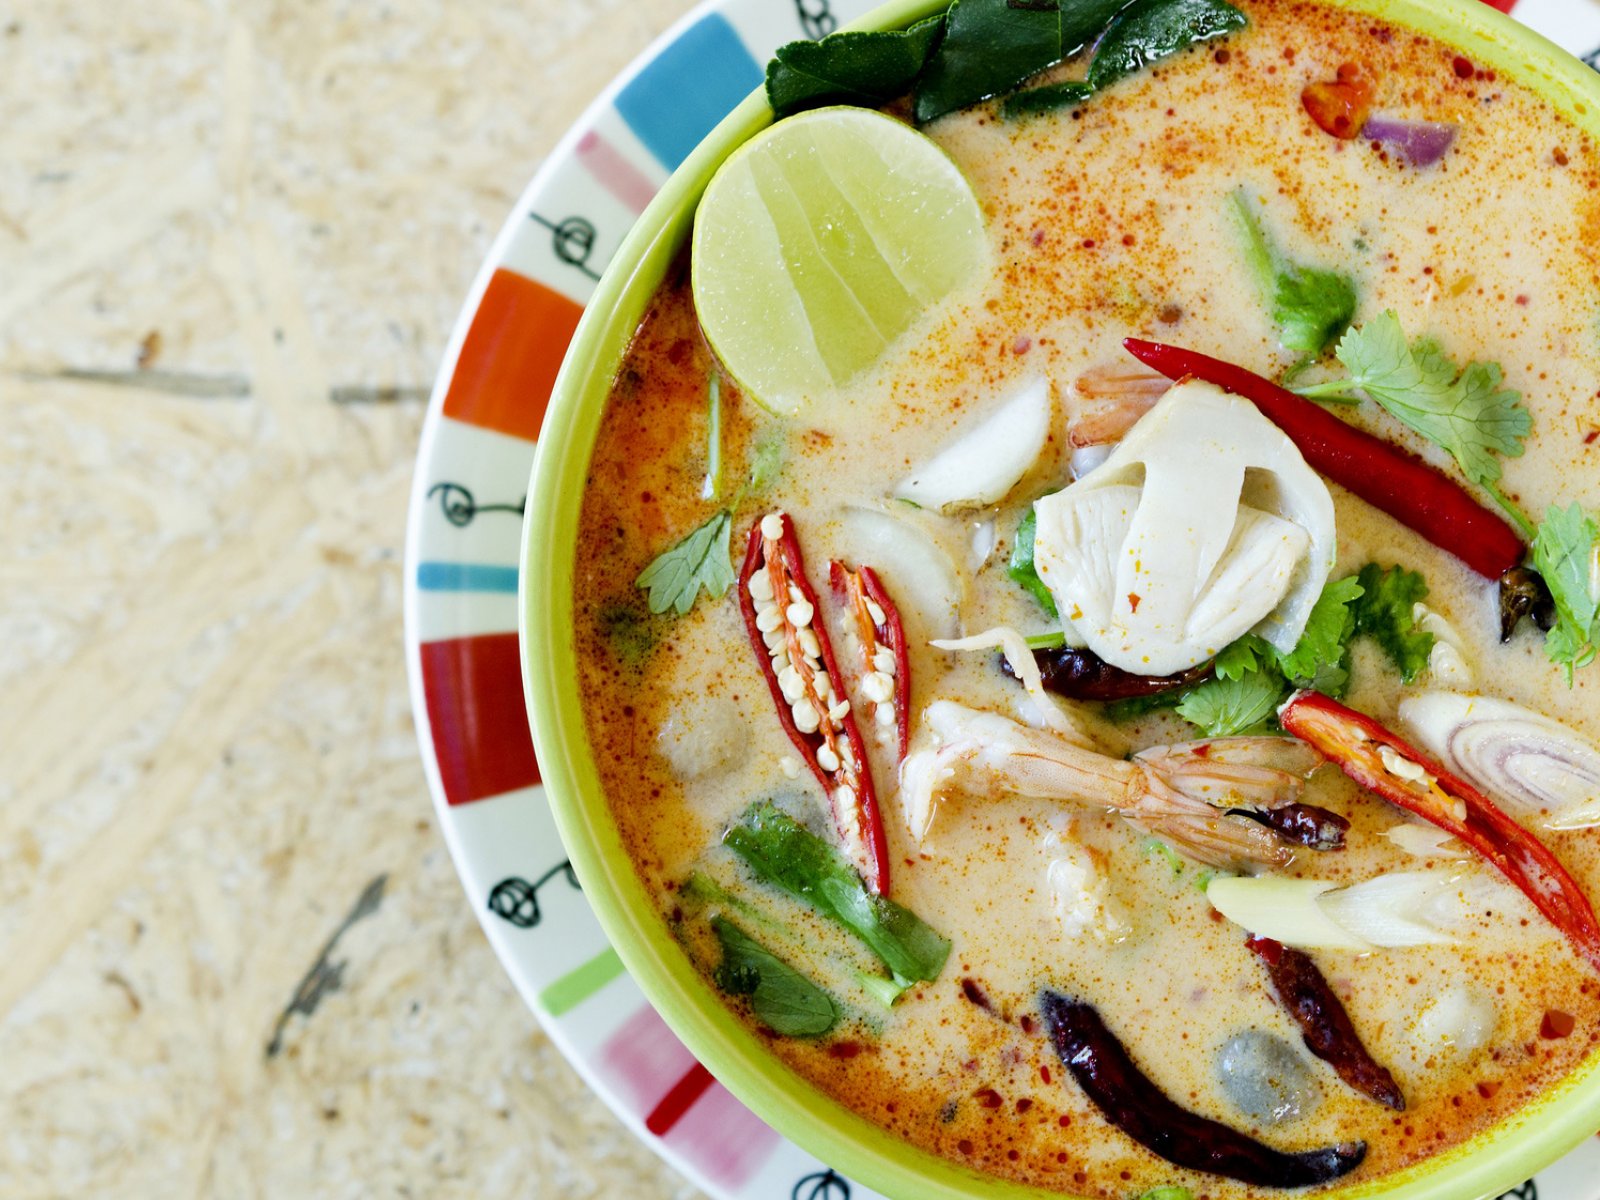 How to try Tom Yam in Phuket